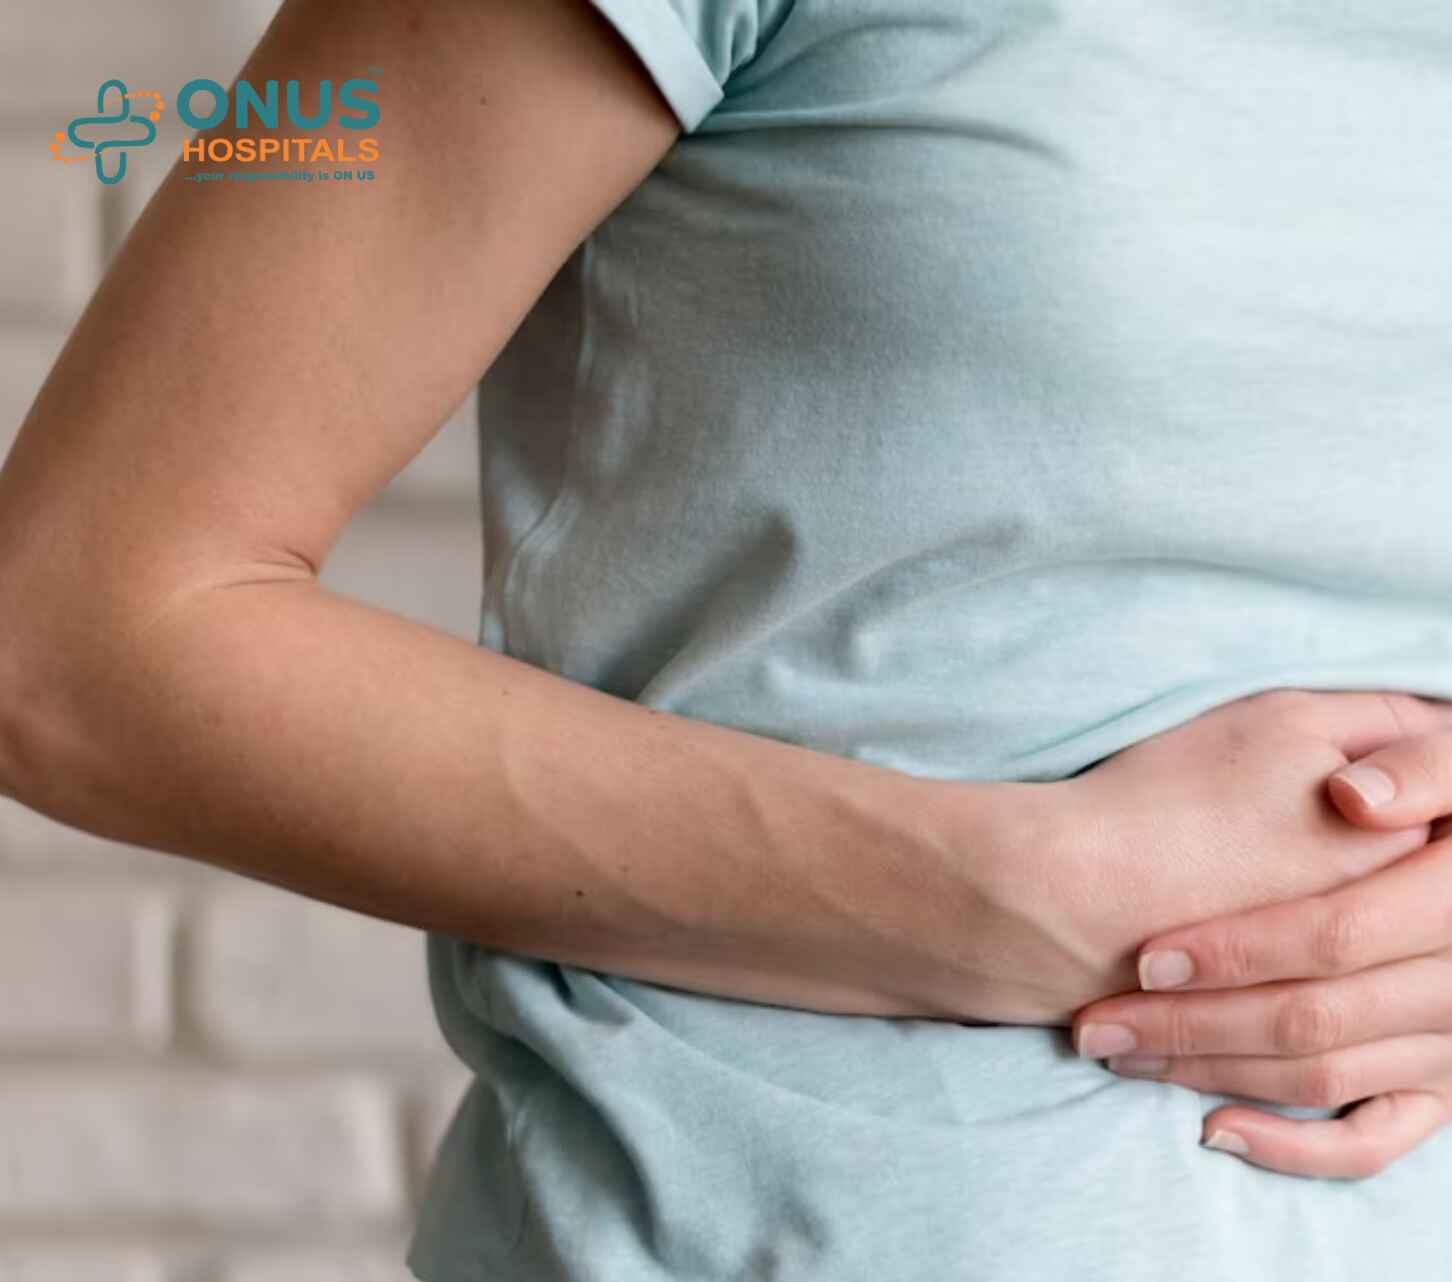  How to Recognize the Symptoms of Appendicitis?